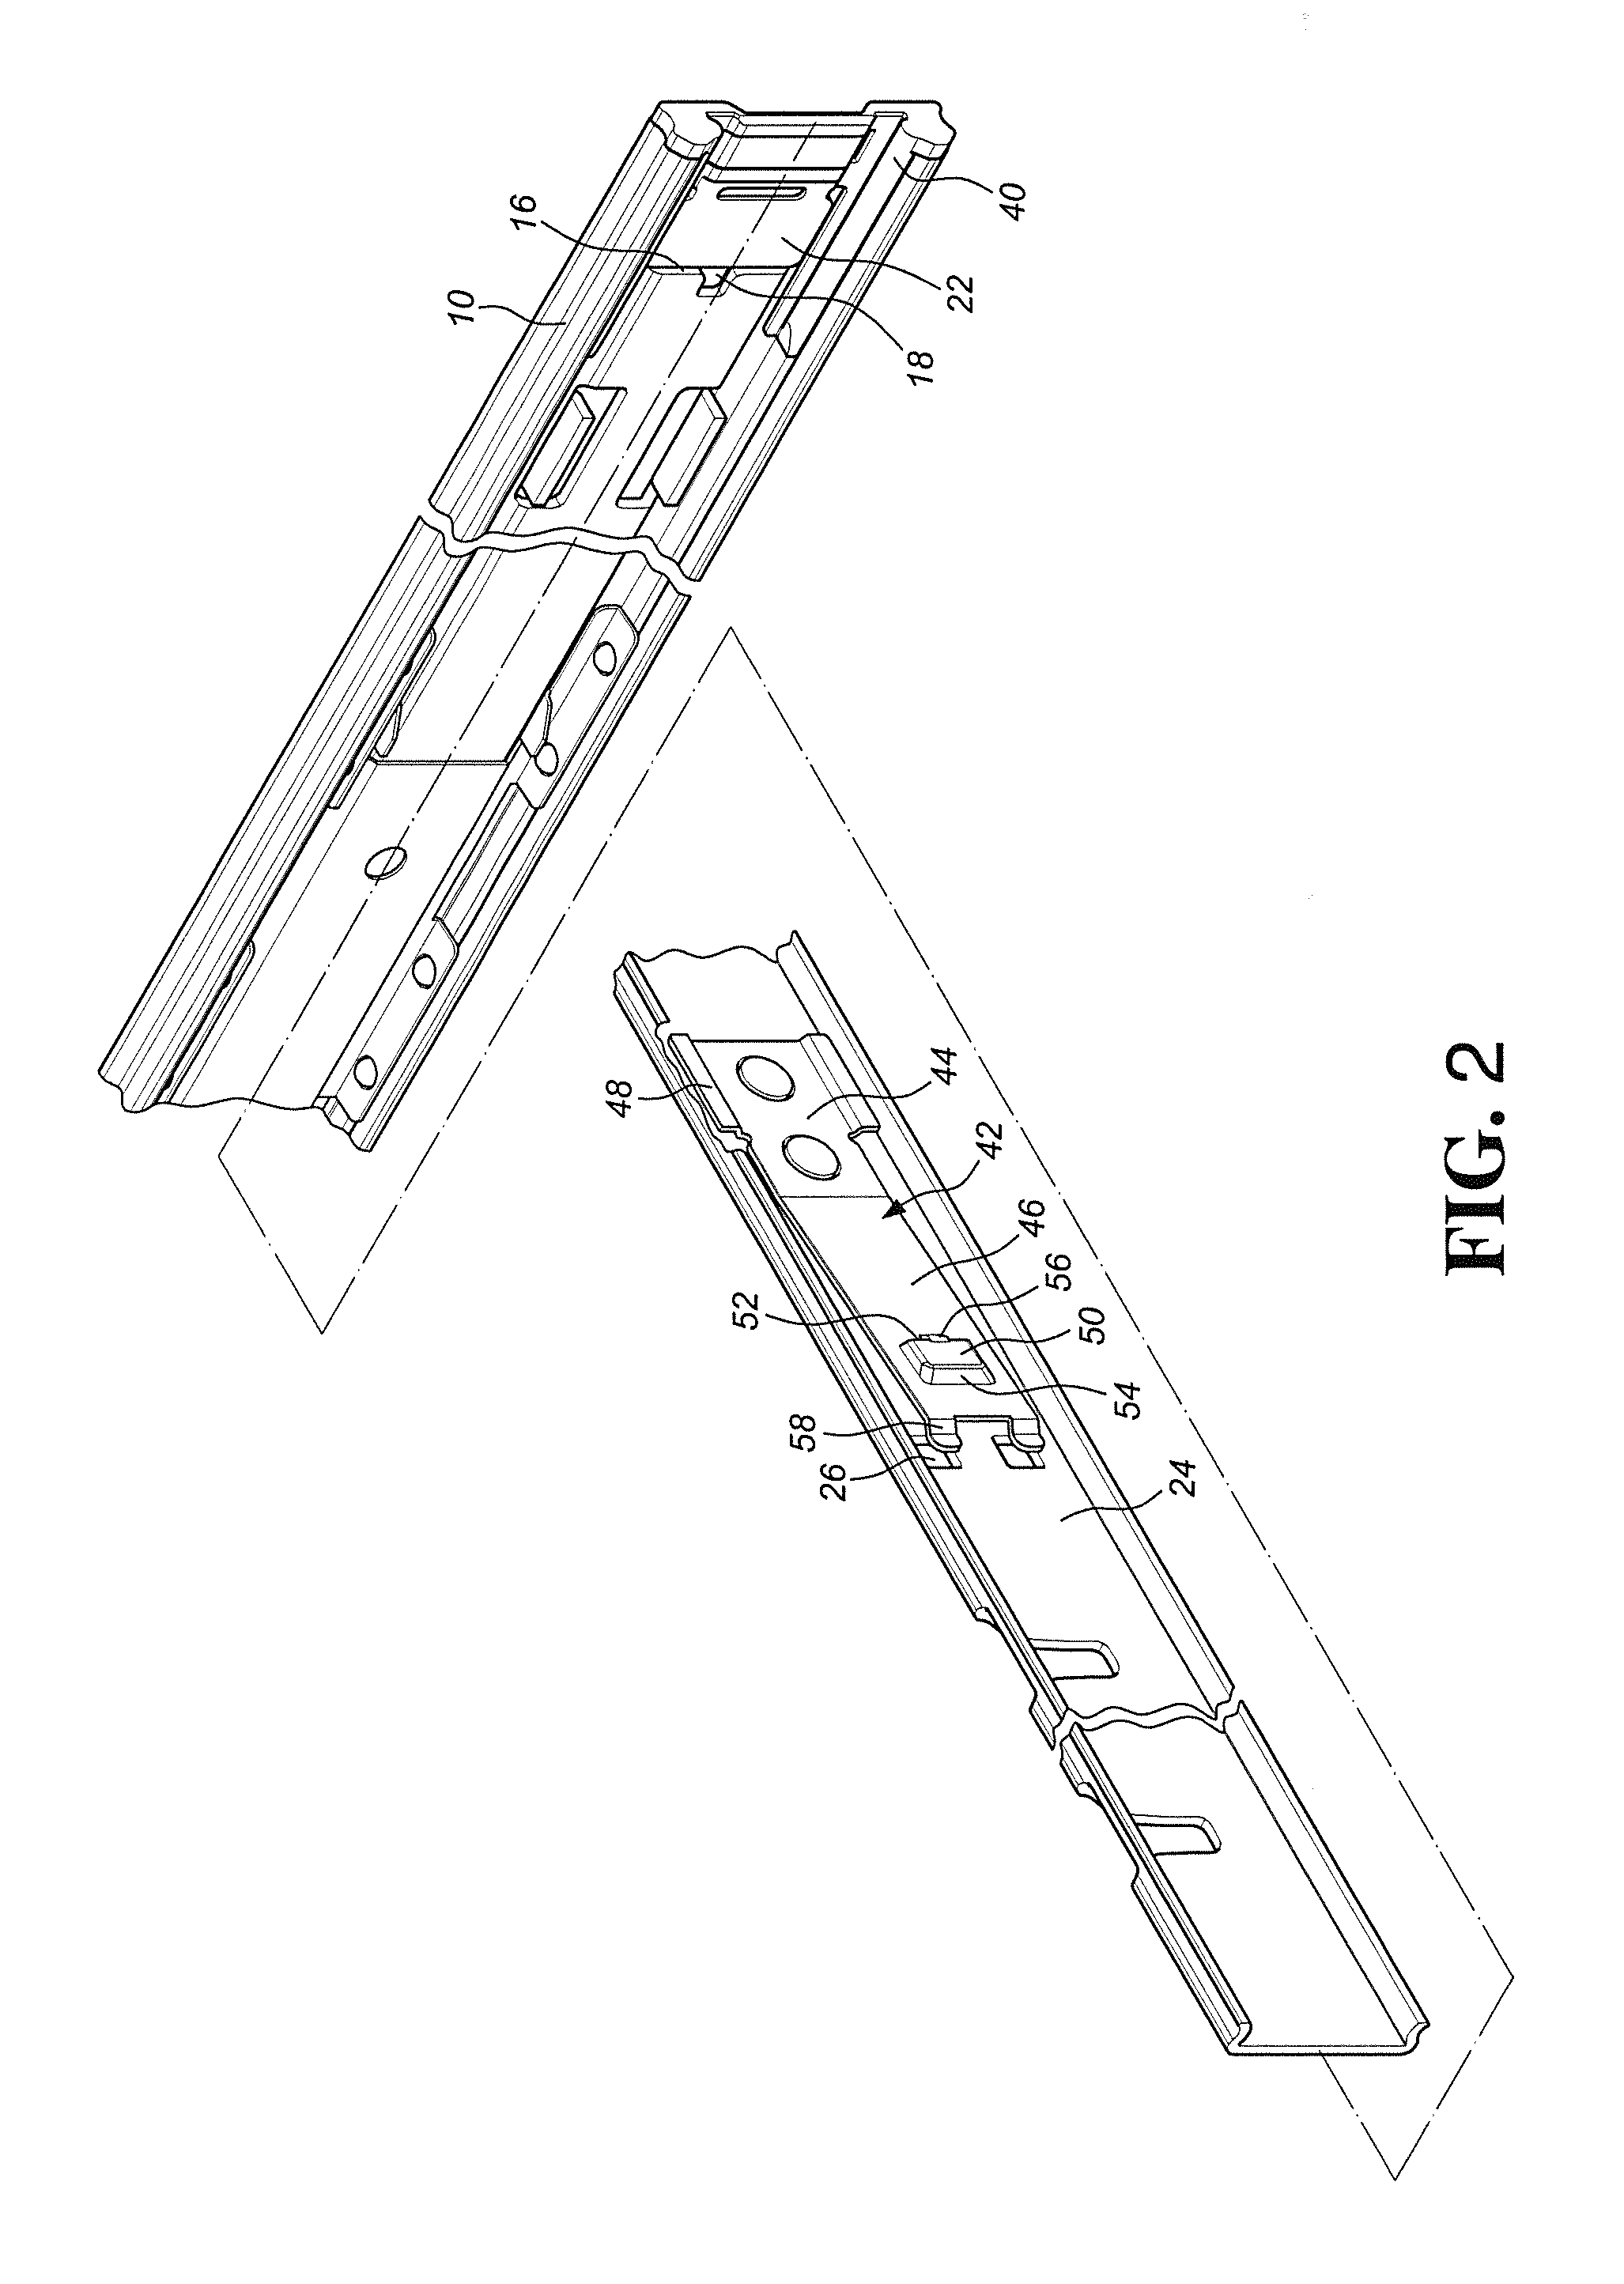 Slide assembly with positioning device